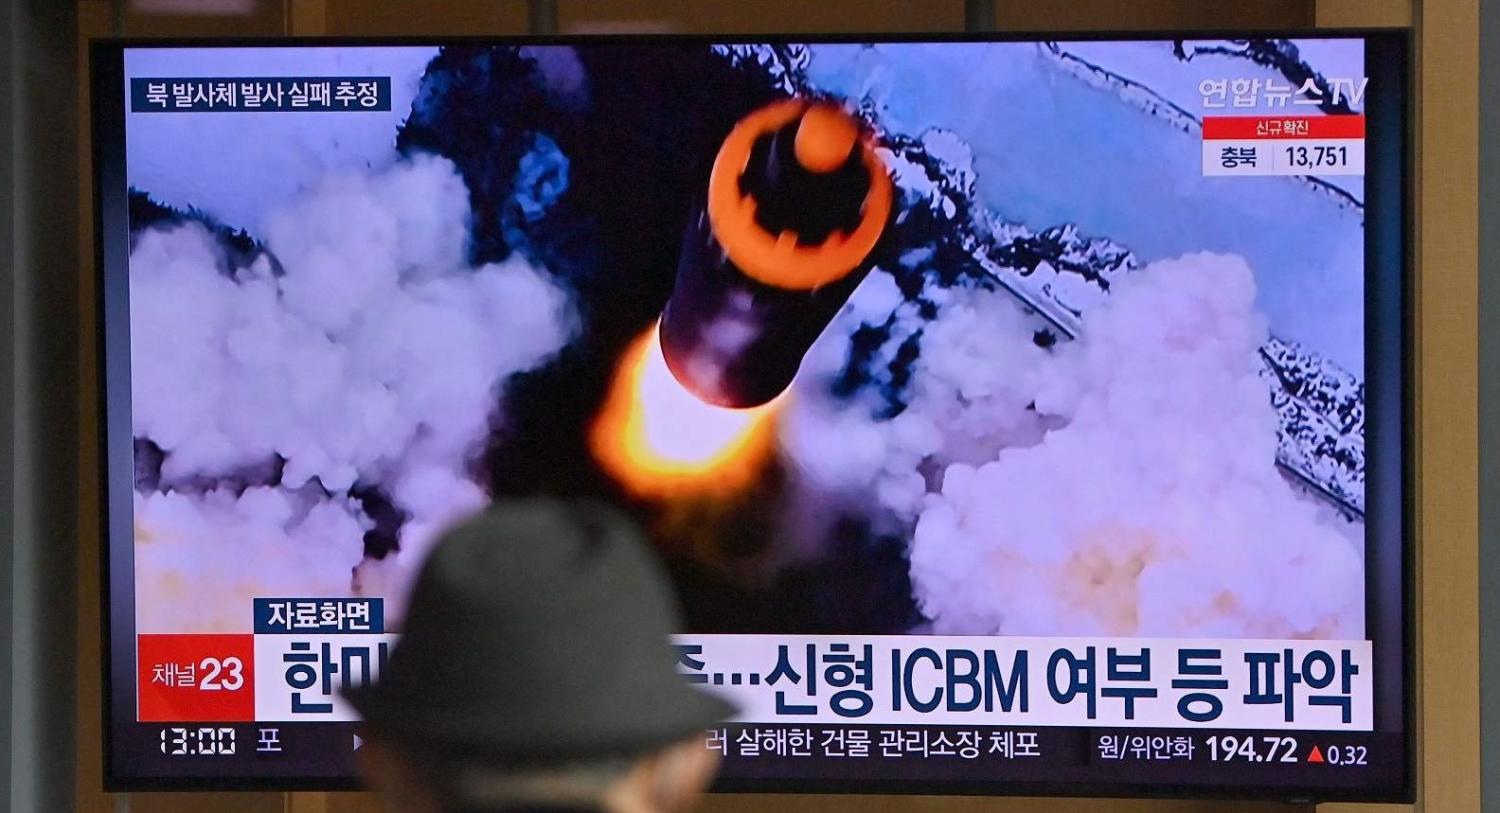 A news broadcast shows file footage of a North Korean missile test after North Korea fired an “unidentified projectile” on 16 March 2022 that appears to have immediately failed (Jung Yeon-Je/AFP via Getty Images)